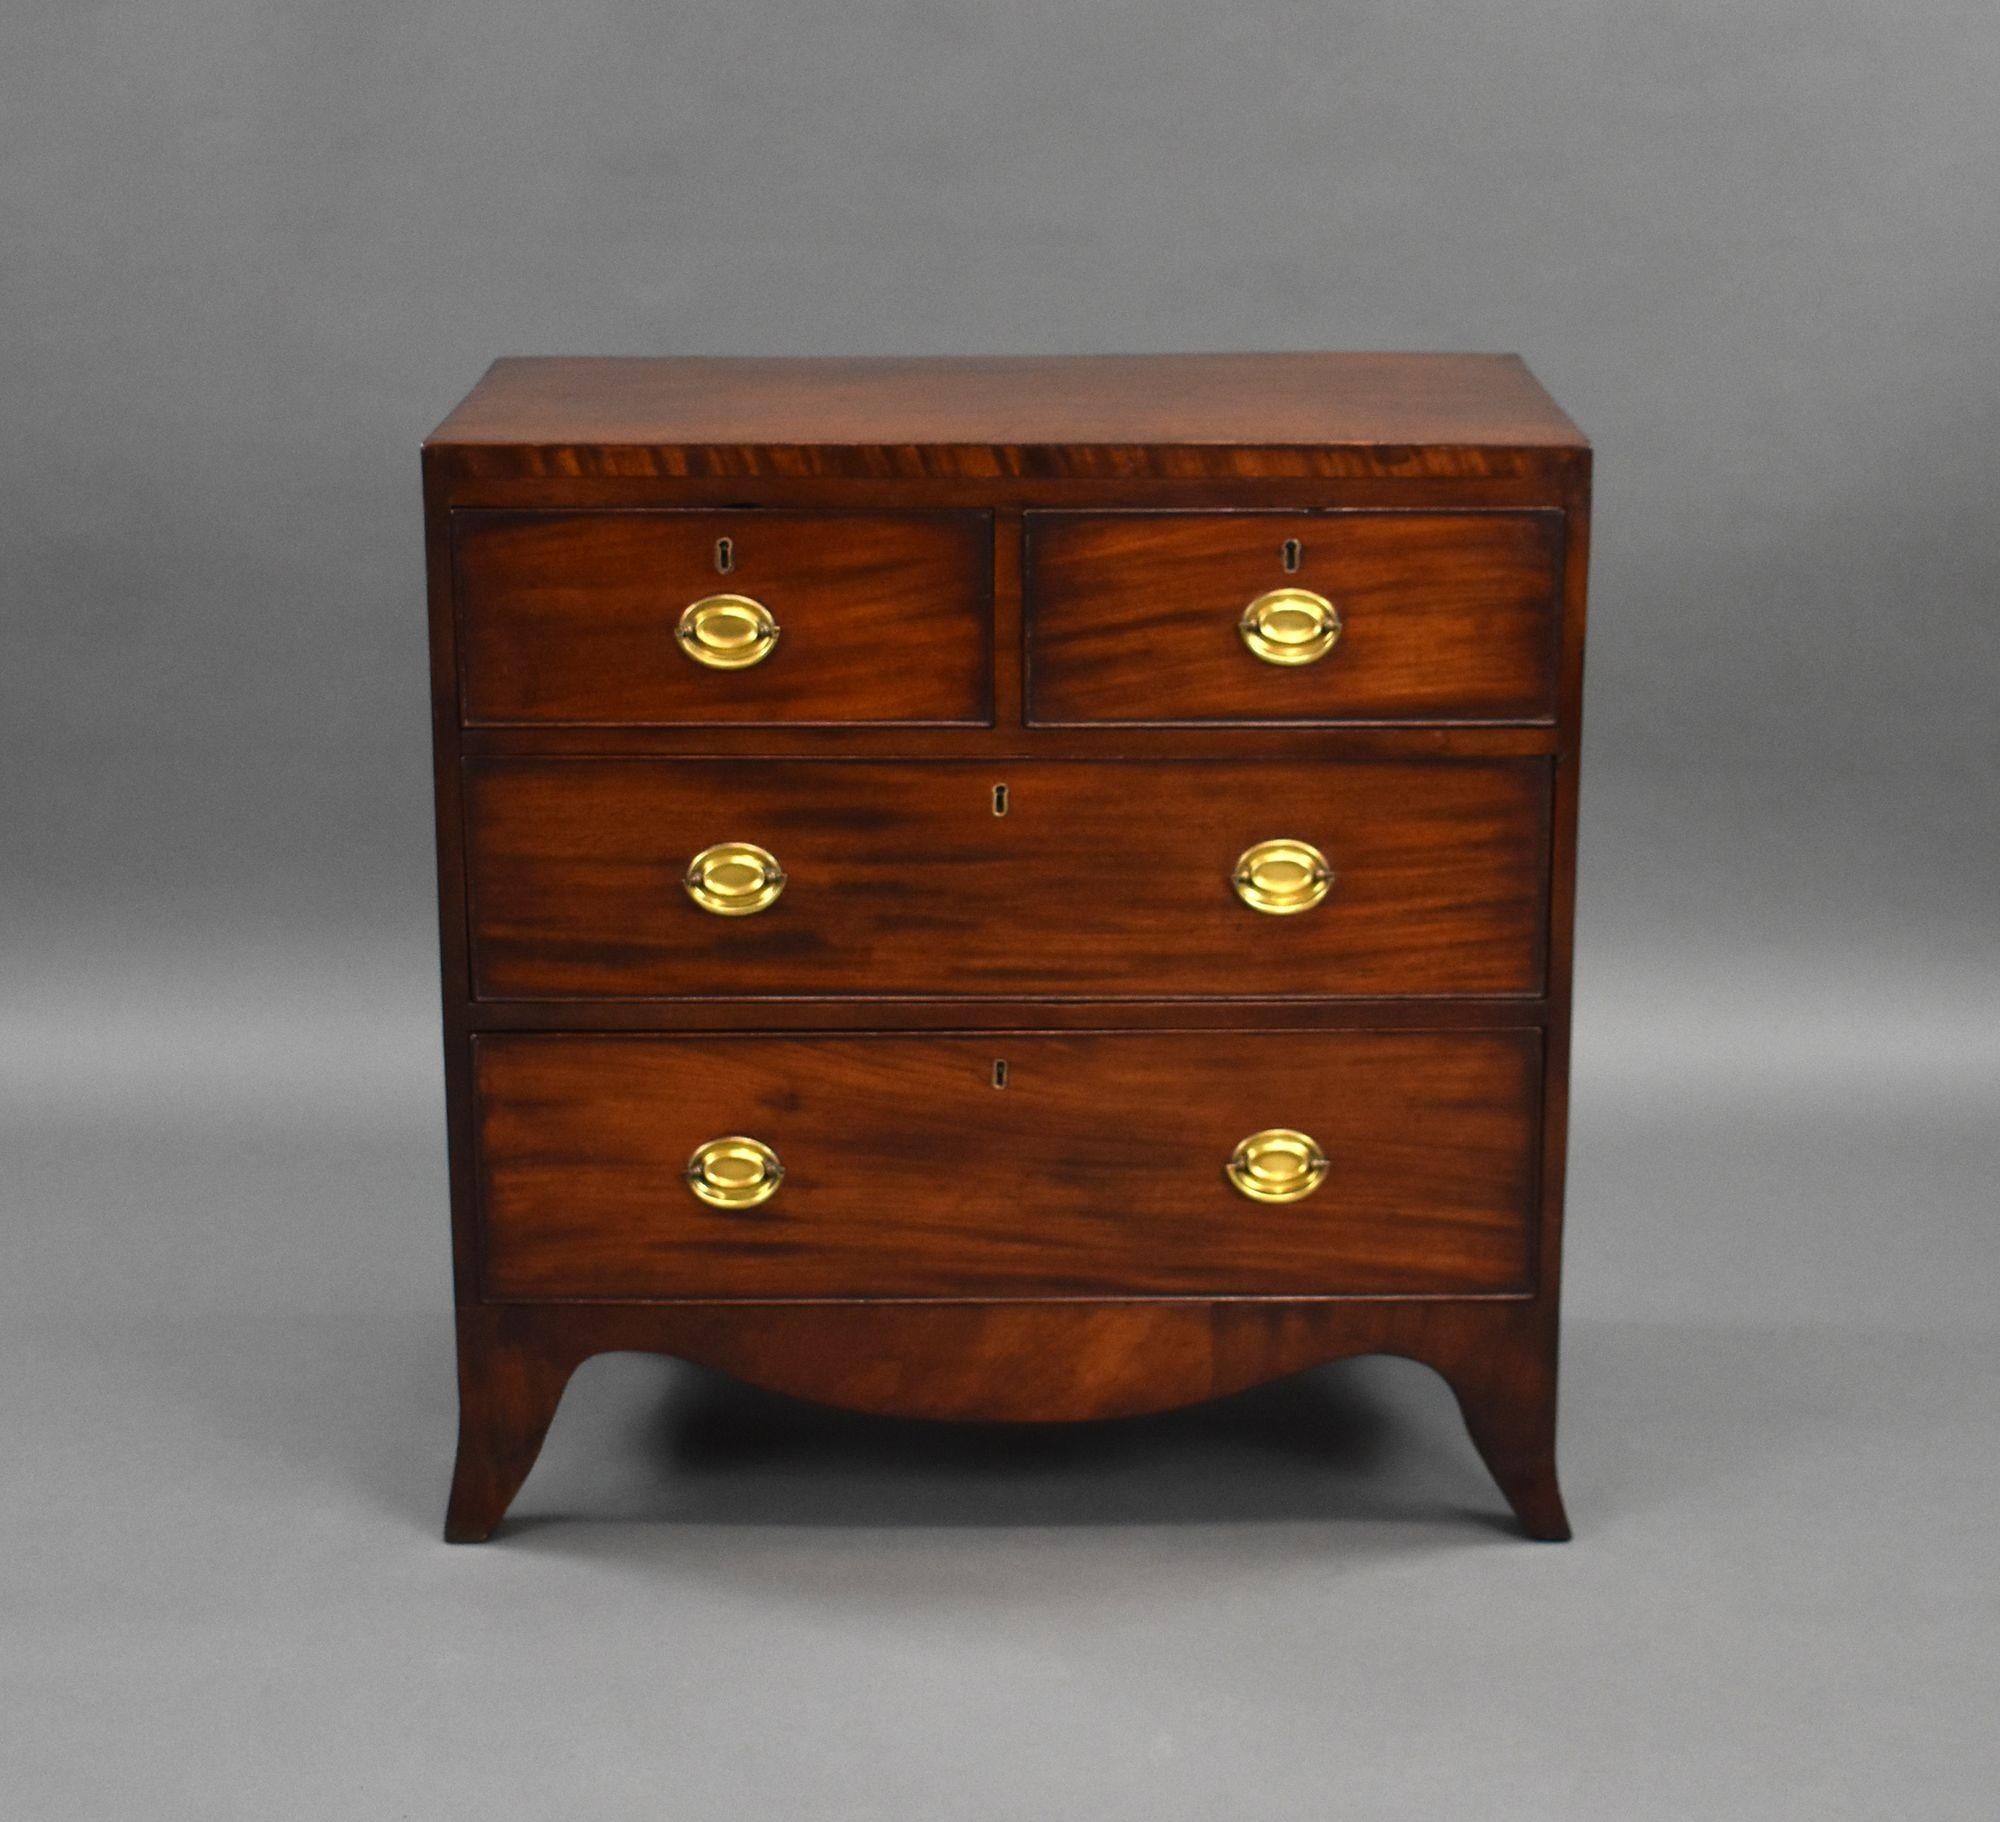 For sale is a good quality Regency mahogany chest of drawers, of small proportions, the chest has an arrangement of four drawers, two short over two long, each with brass handles. The chest stands on elegant splayed feet and is in very good